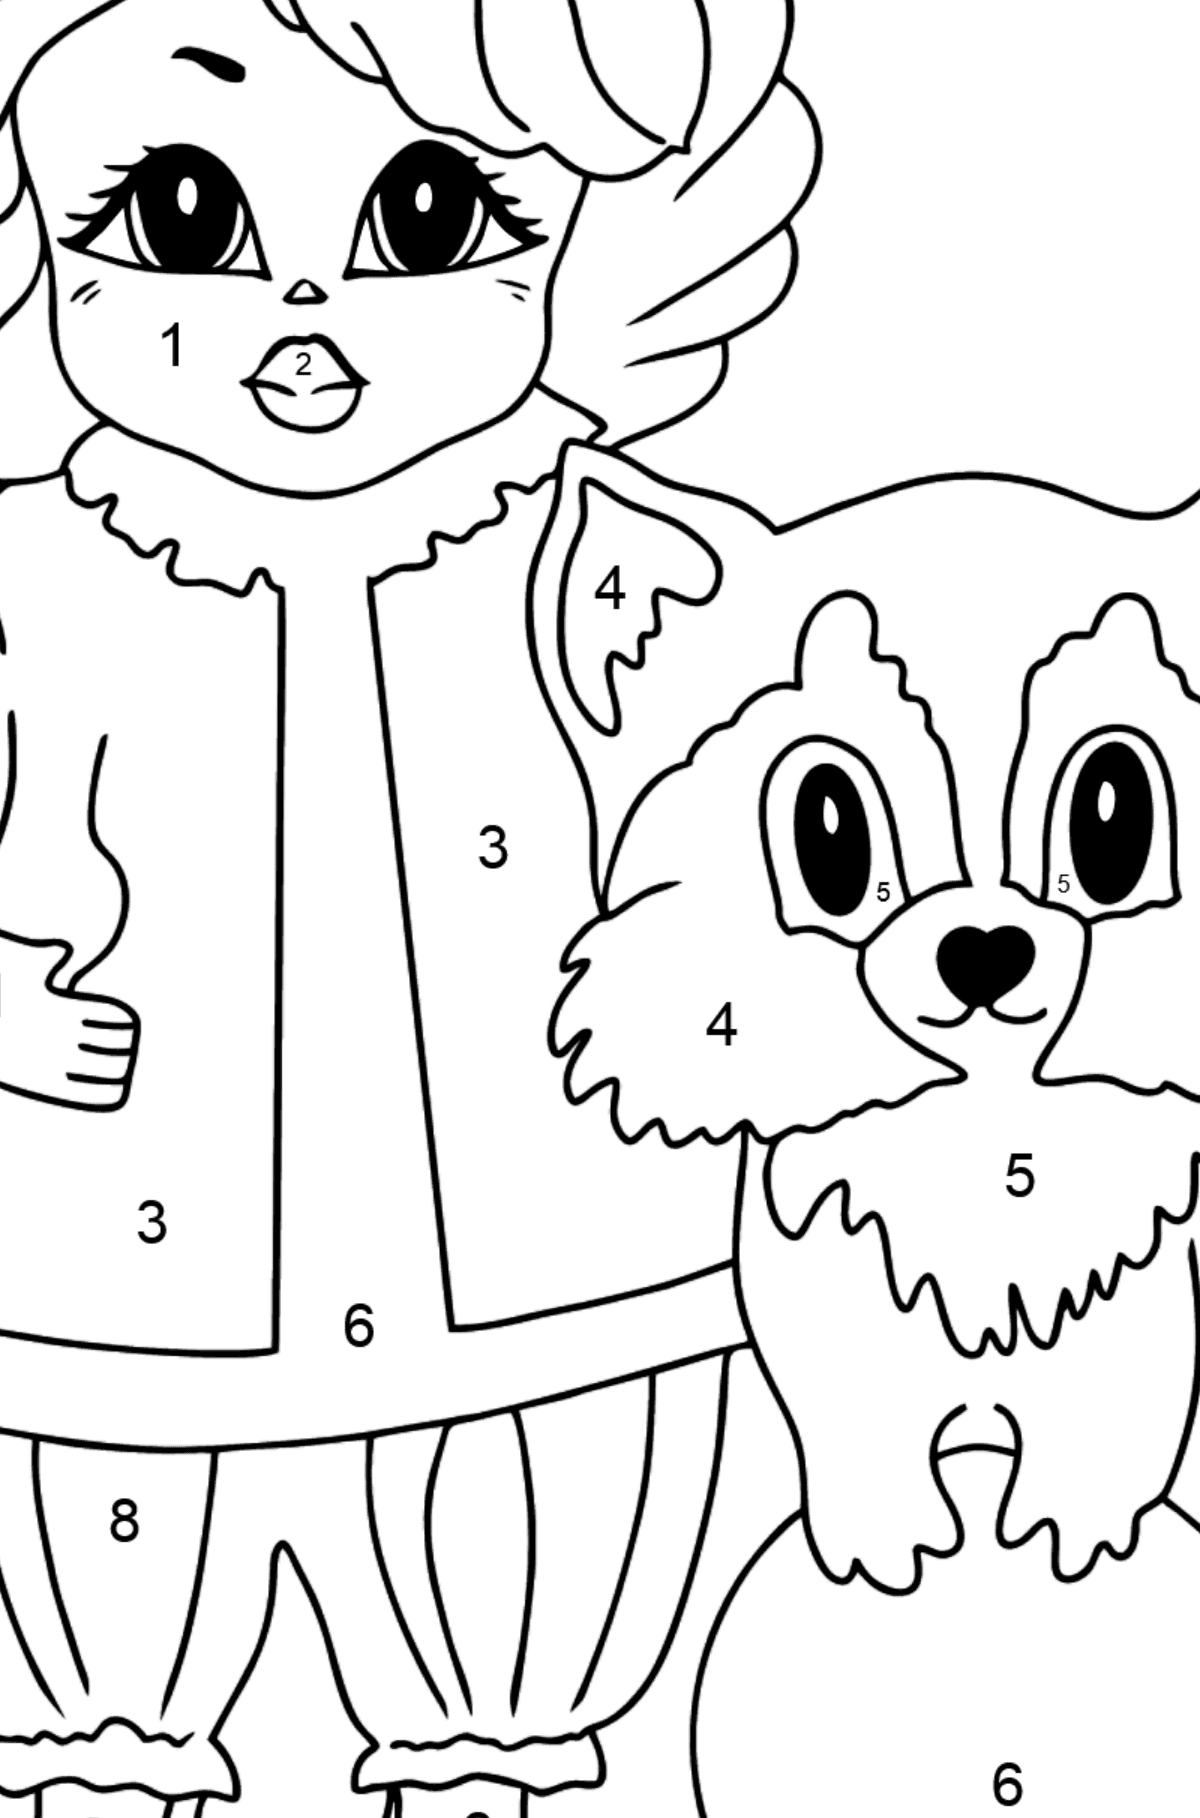 Coloring Picture - A Princess with a Cat and a Racoon - Coloring by Numbers for Kids